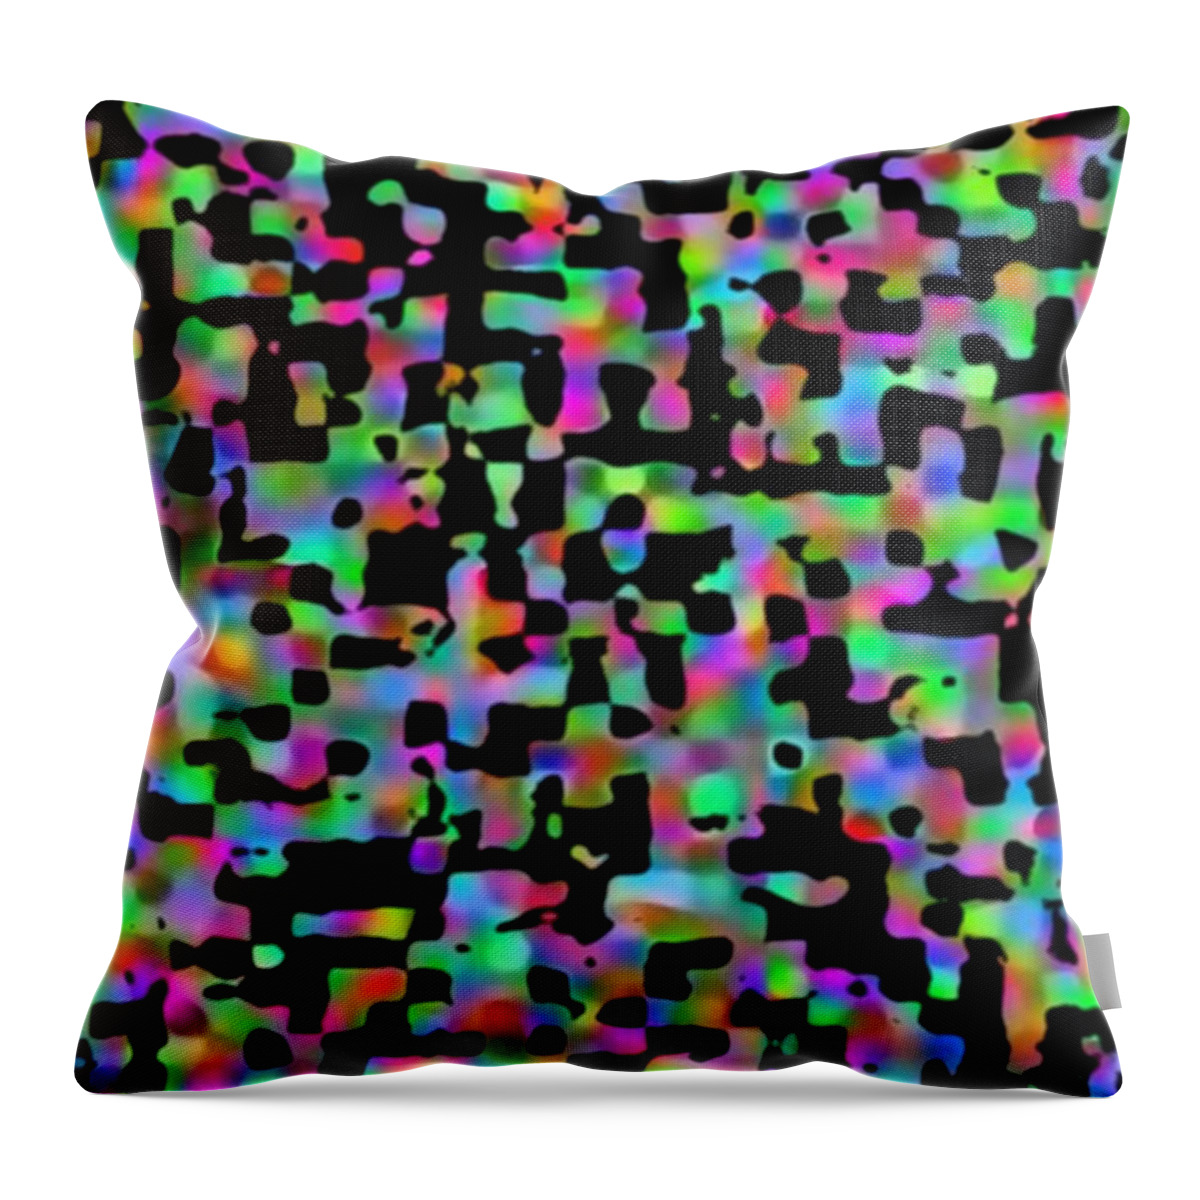 Squirrun Throw Pillow featuring the photograph Squirrun by Mark Blauhoefer